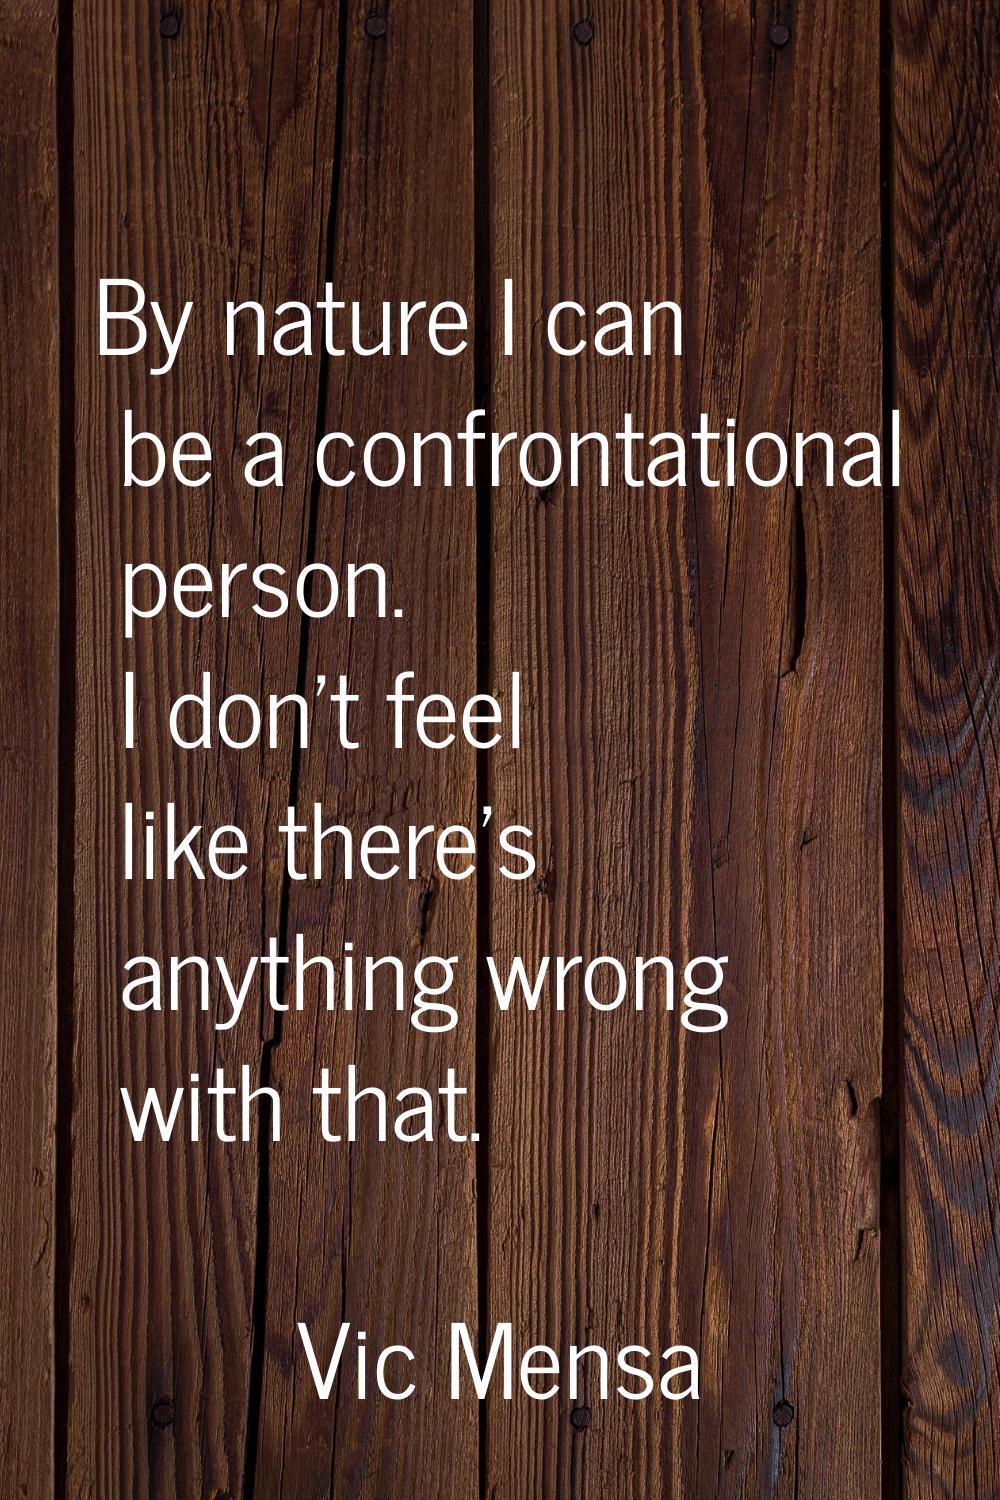 By nature I can be a confrontational person. I don't feel like there's anything wrong with that.